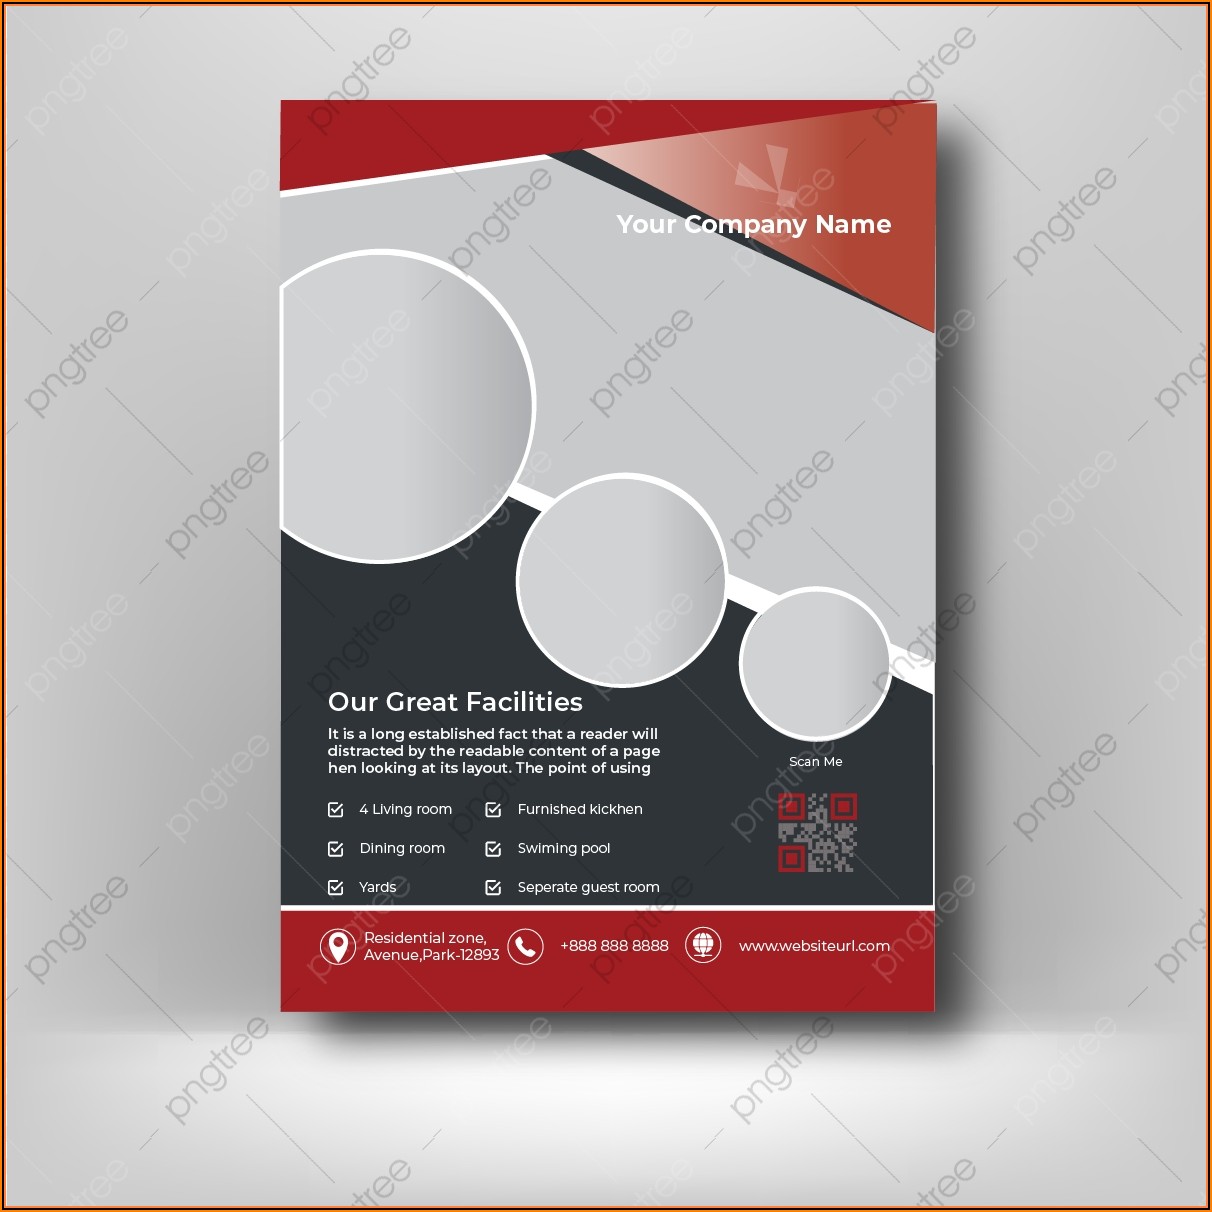 Free Template For Flyers Design